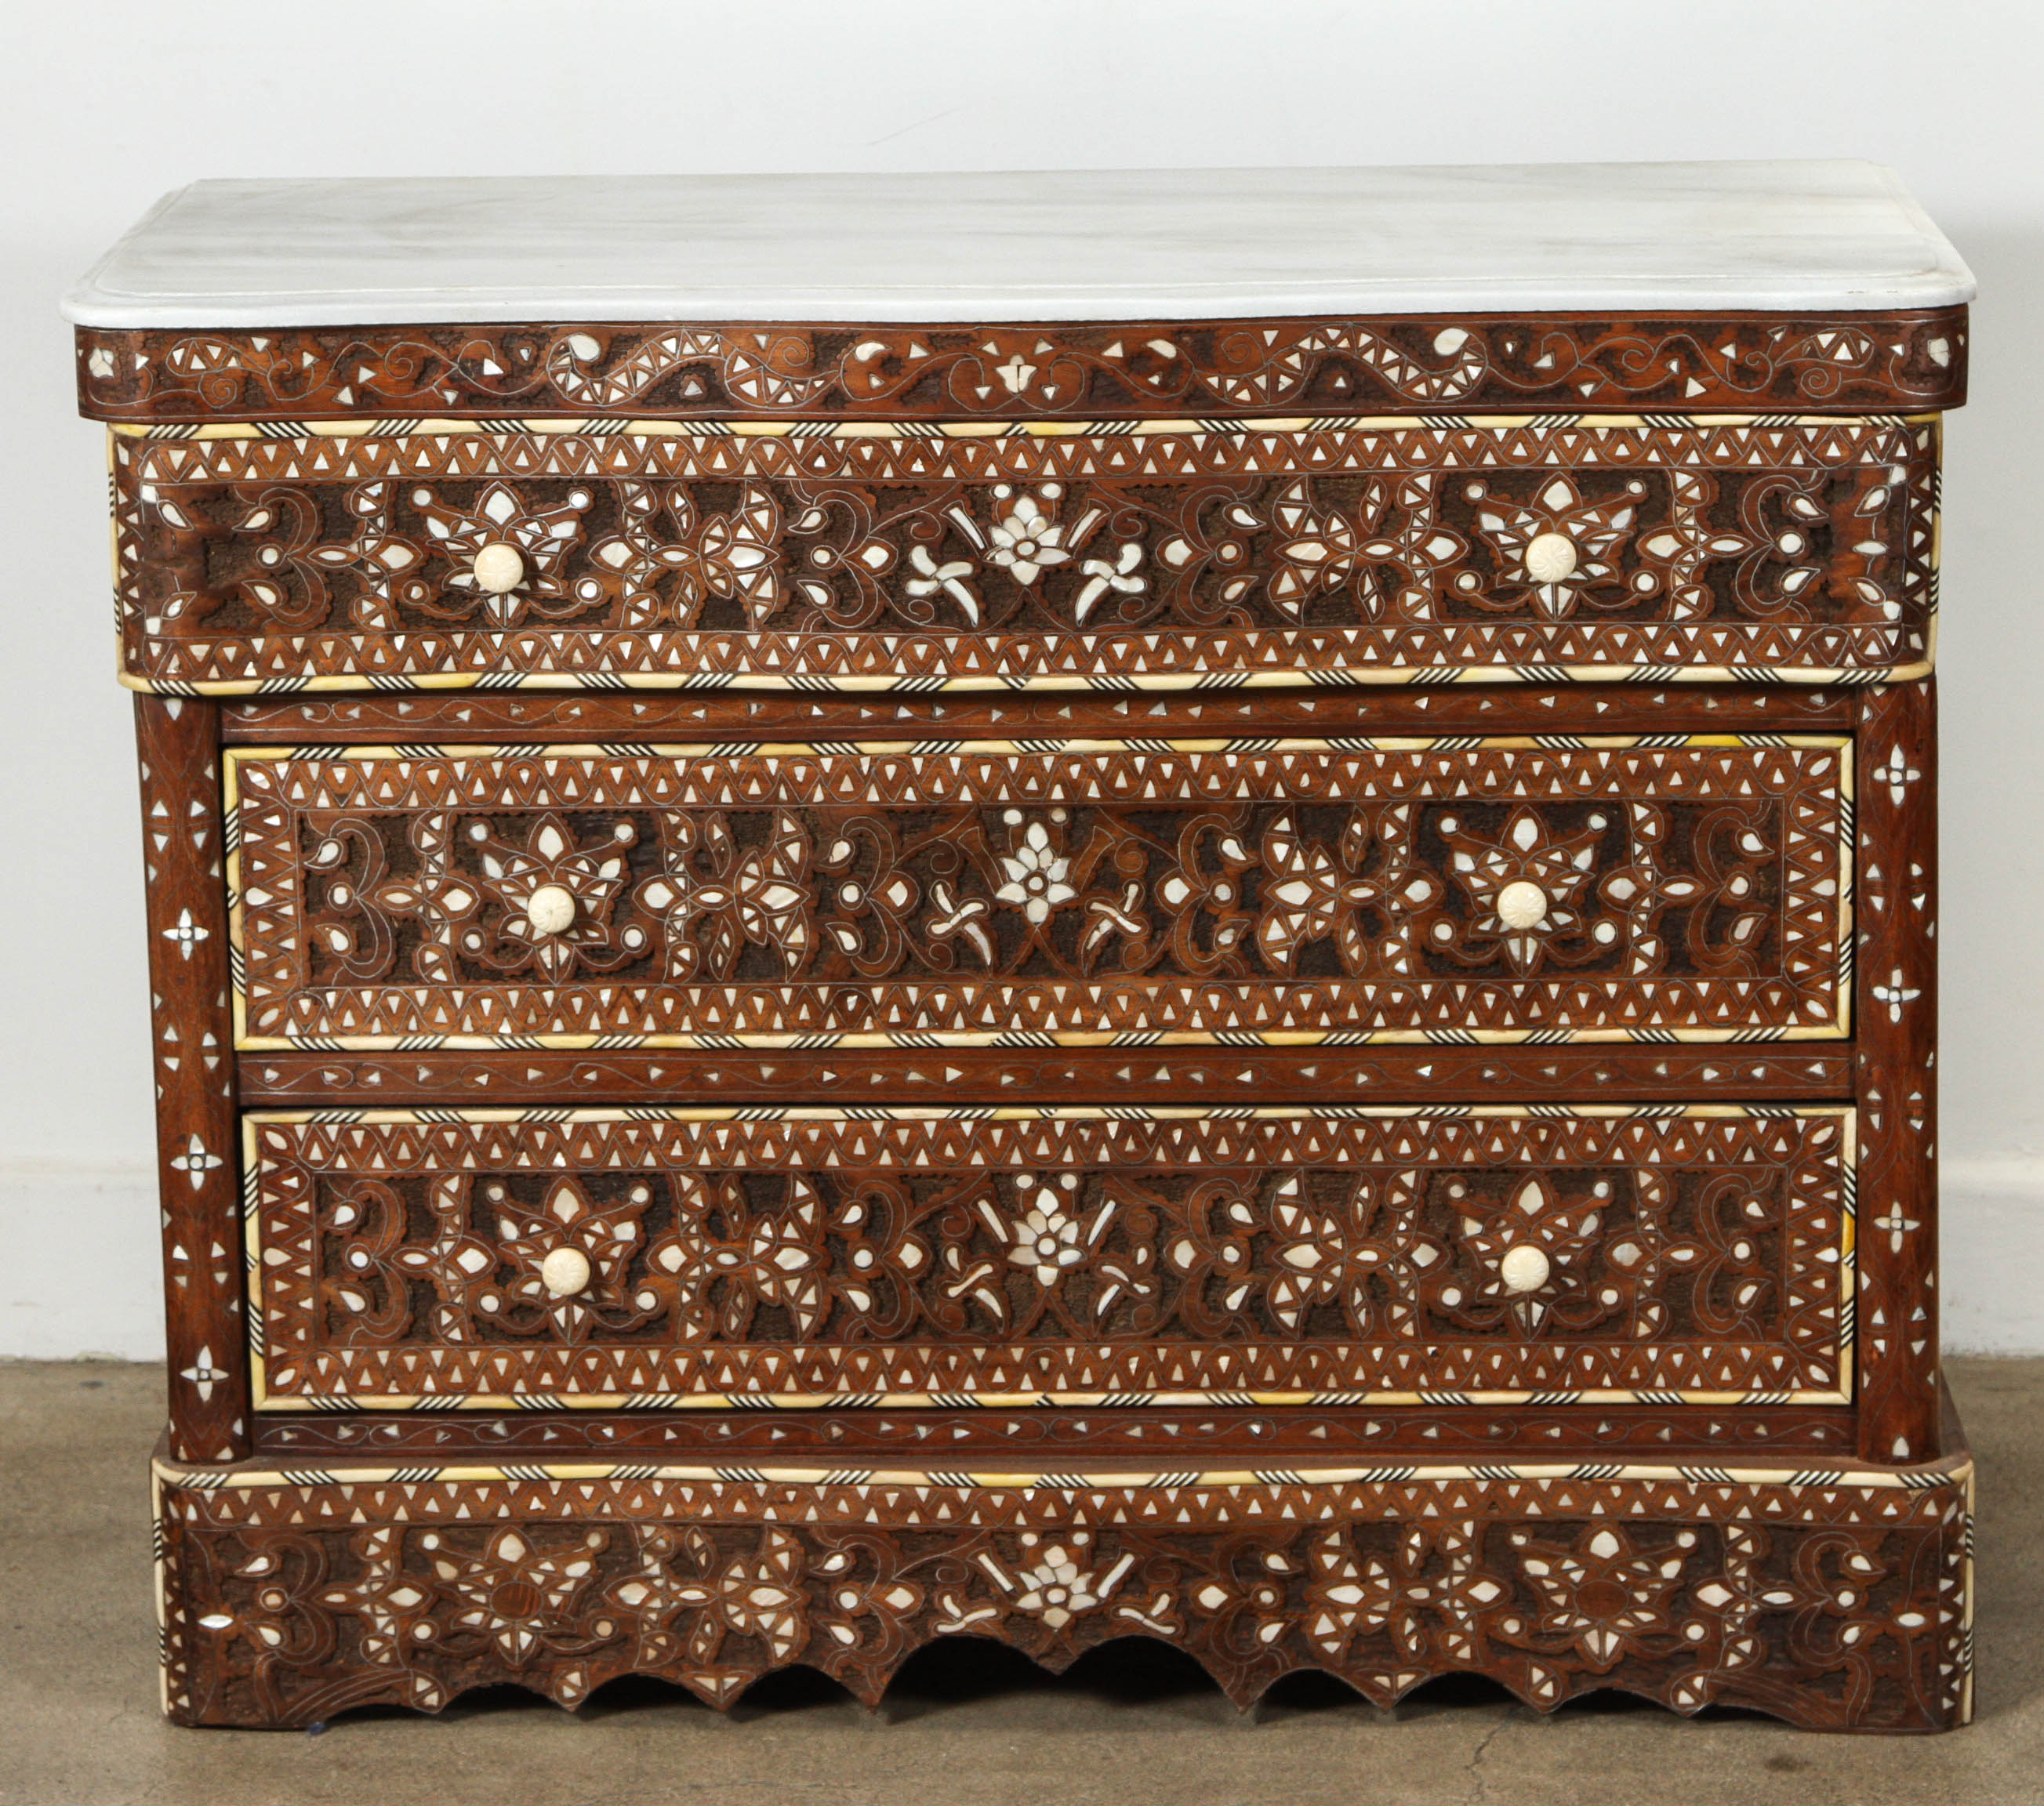 Syrian Chest of Drawers Inlay with Mother of Pearl